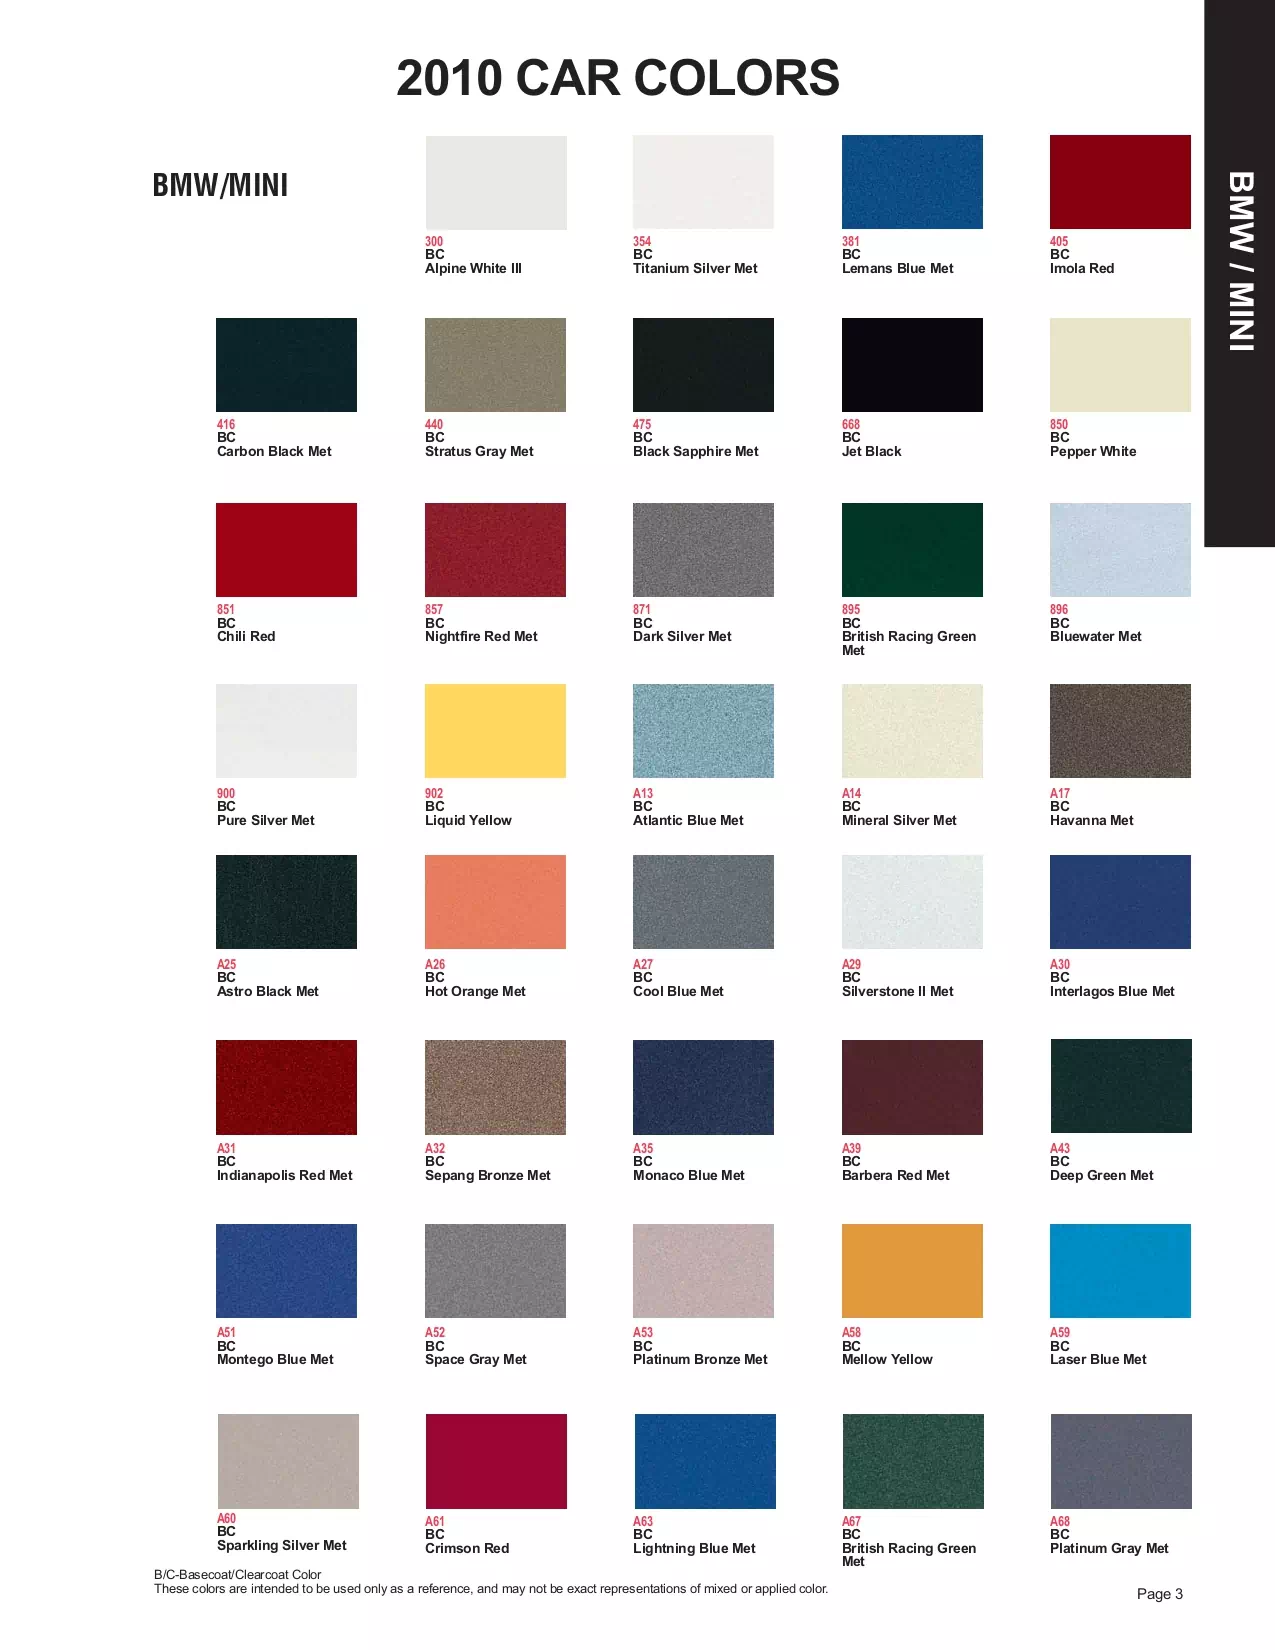 paint chips, and the chips ordering codes for the exterior colors of bmw in 2010